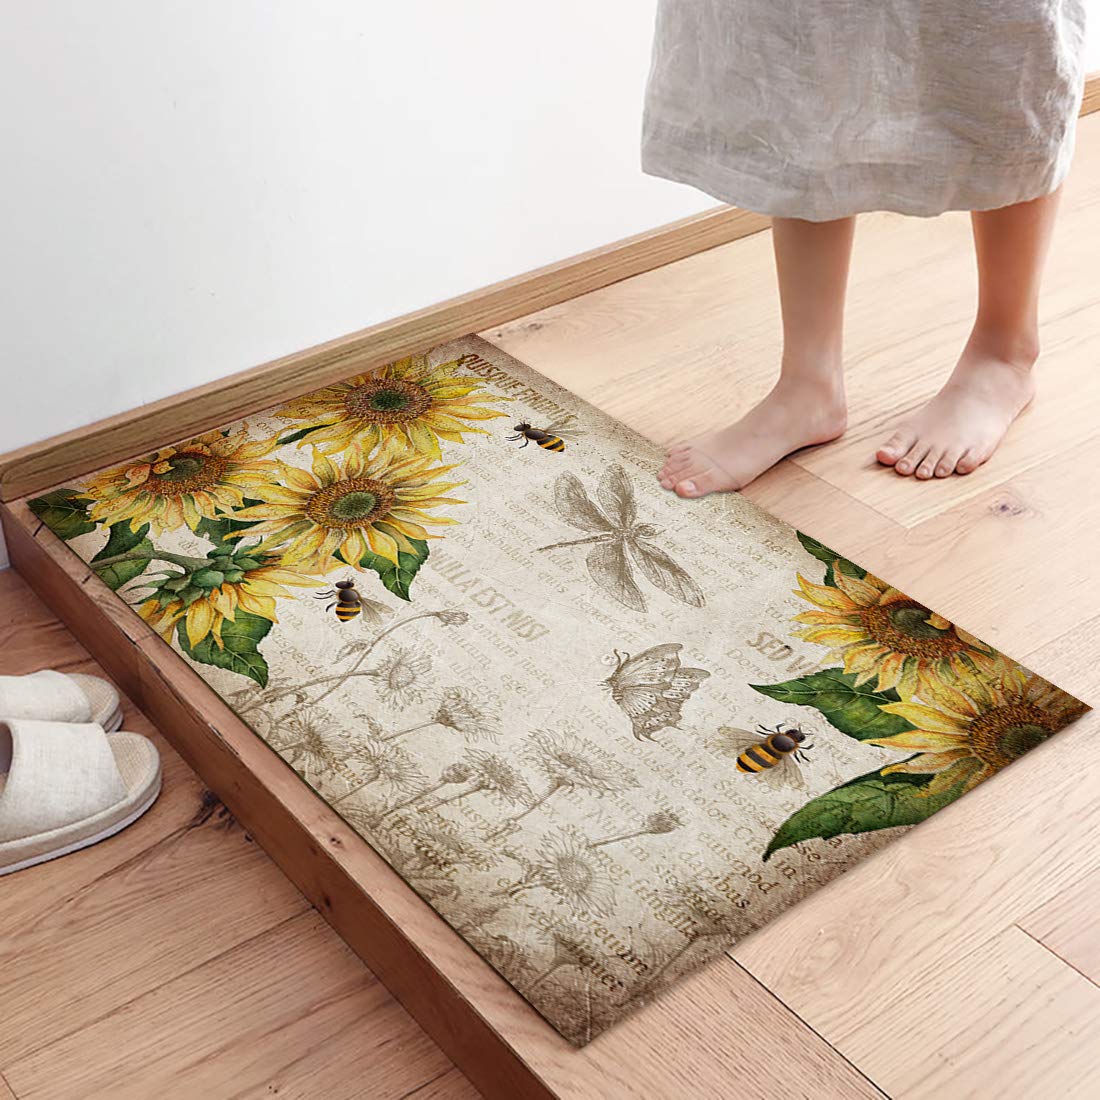 Door Mat for Bedroom Decor, Farm Sunflowers and Butterflies on Newspaper Floor Mats, Holiday Rugs for Living Room, Absorbent Non-Slip Bathroom Rugs Home Decor Kitchen Mat Area Rug 18x30 Inch